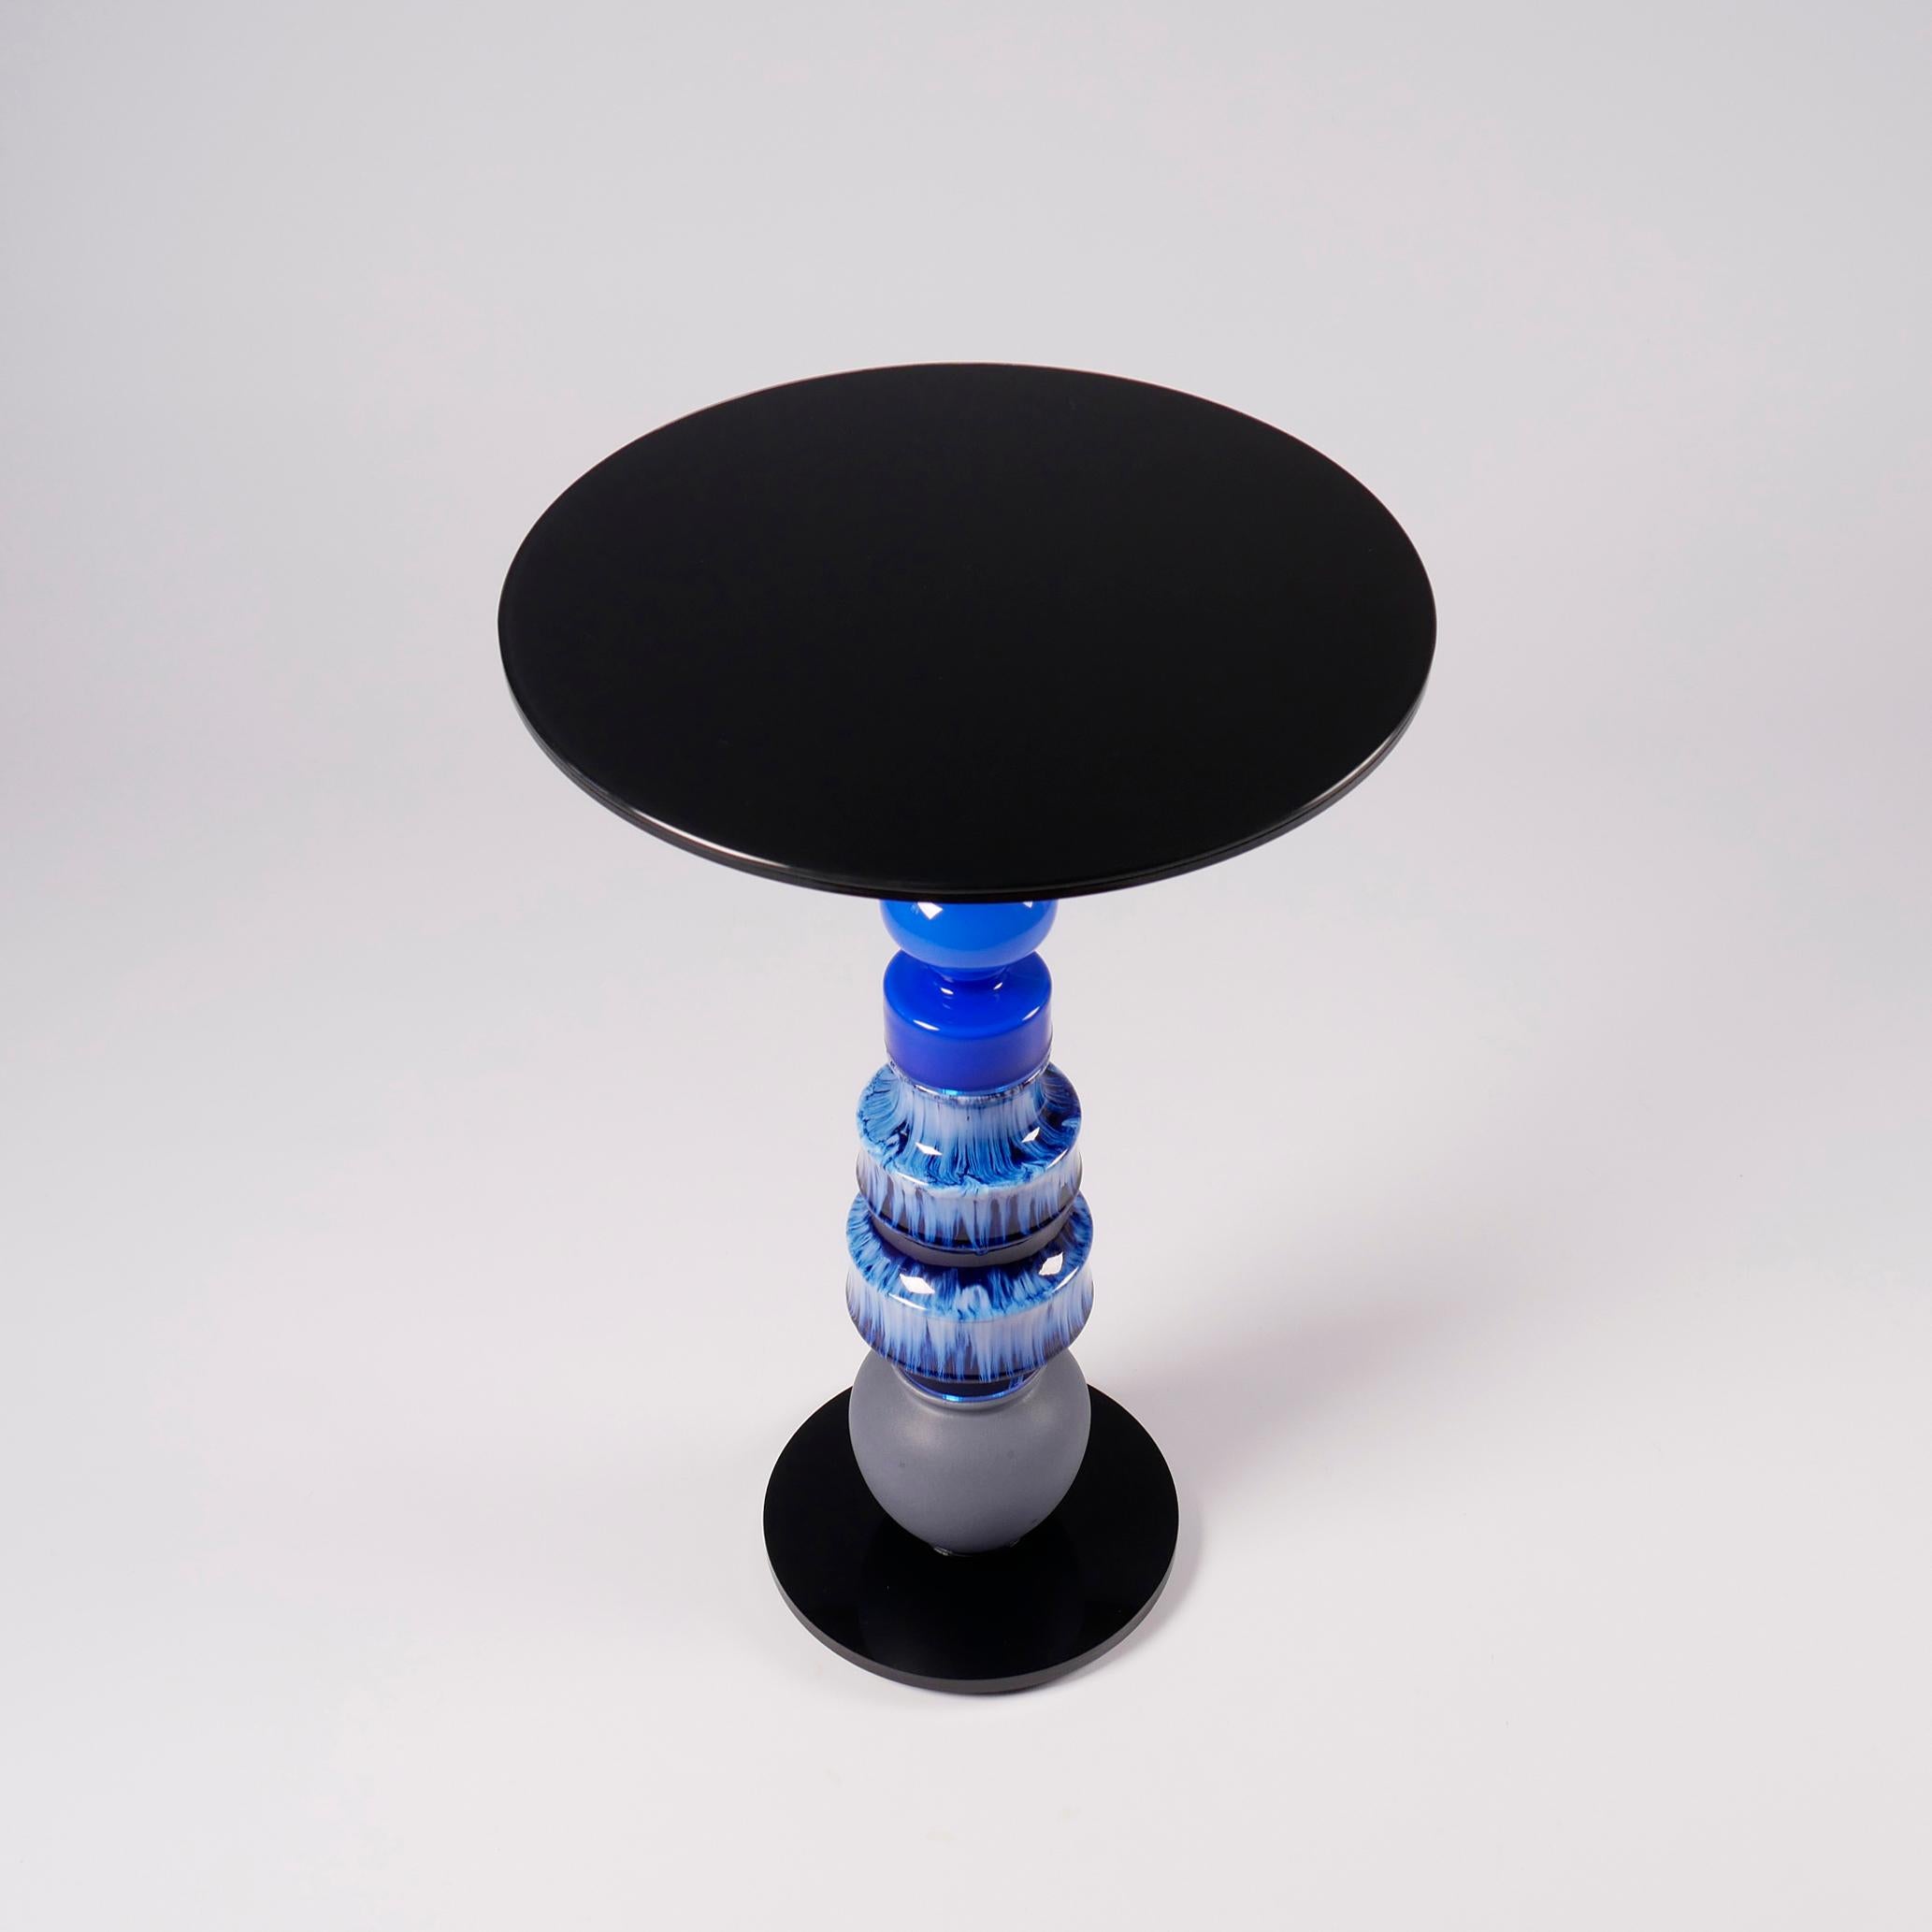 German 'Candy' Side Table, Vintage Ceramics and Glass, One-Off Piece